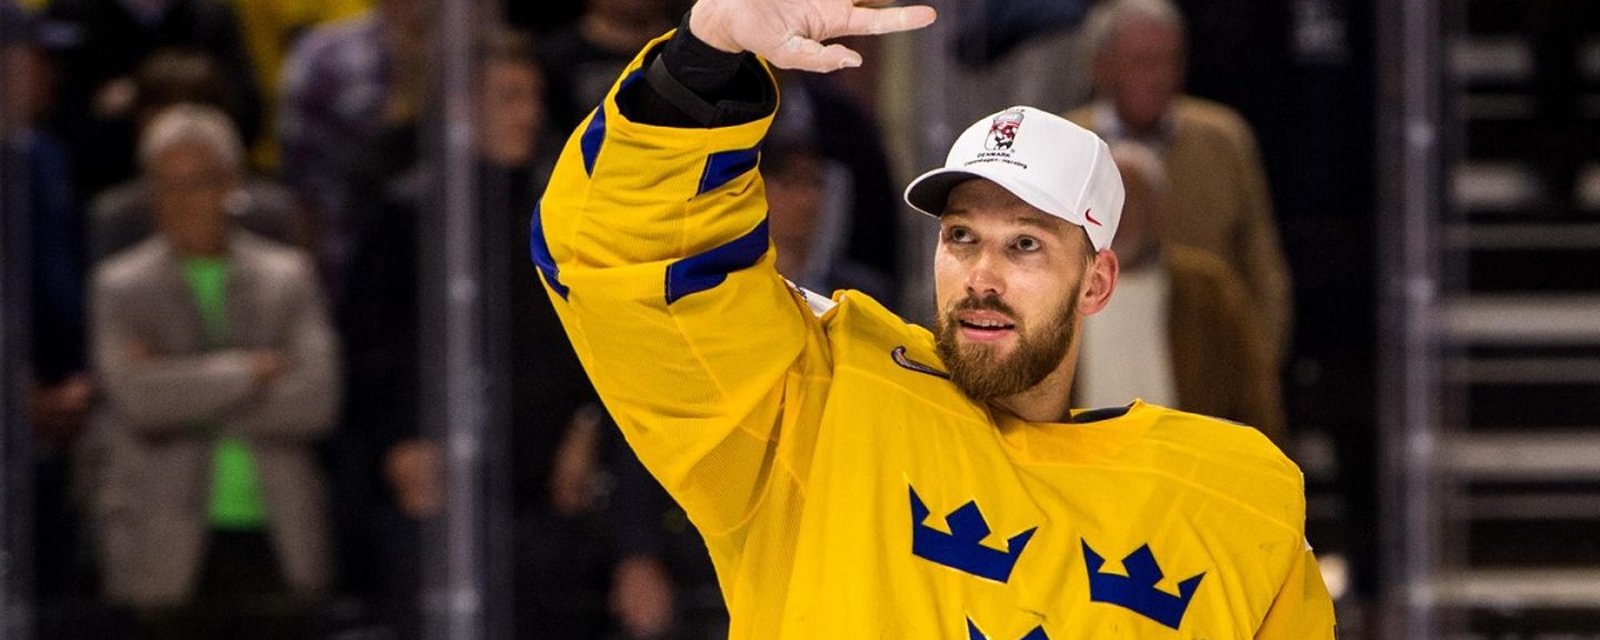 Anders Nilsson says injuries have forced him to retire.